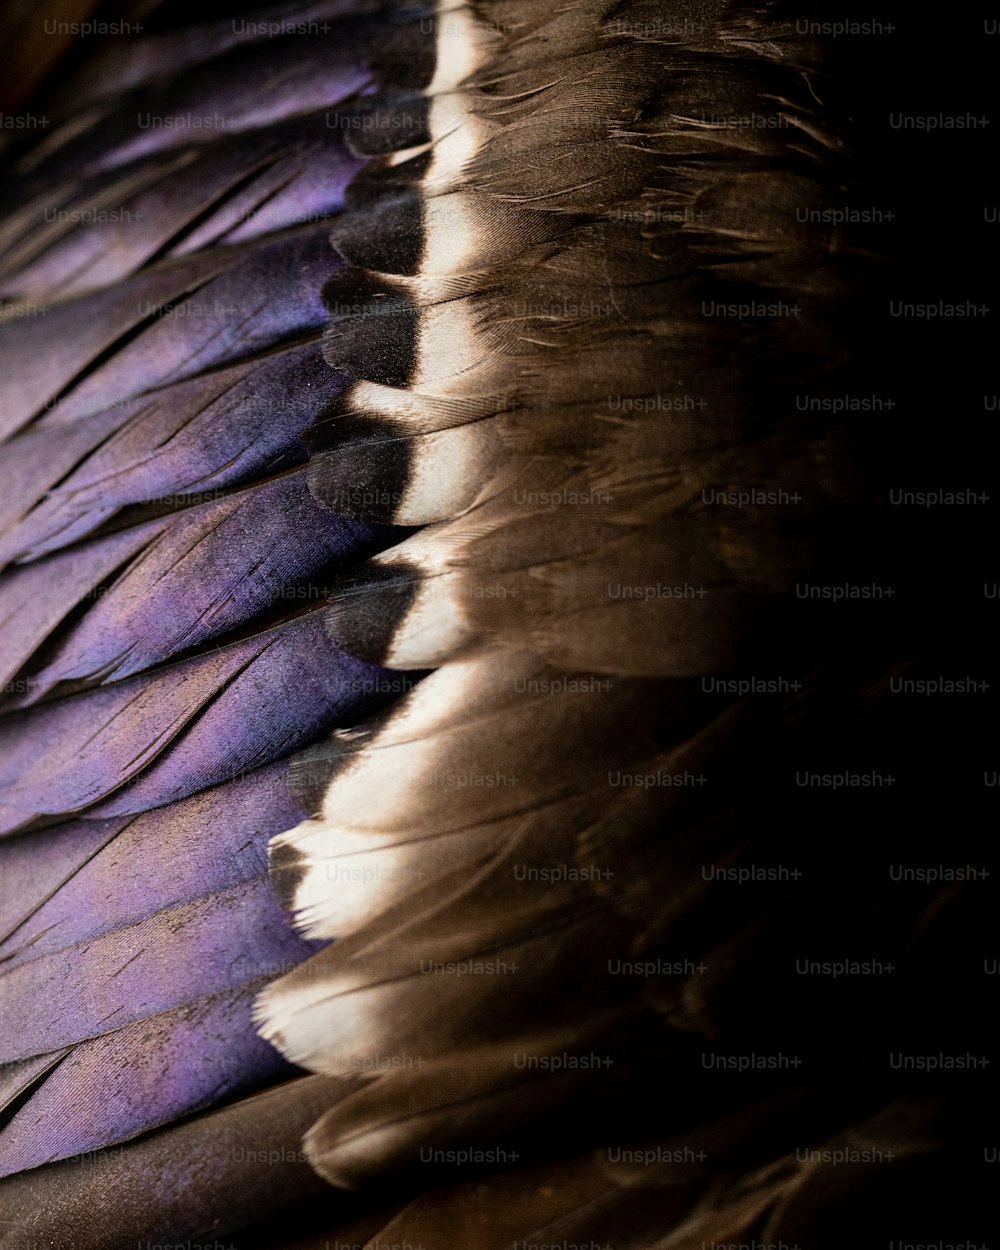 the feathers of a bird are purple and white